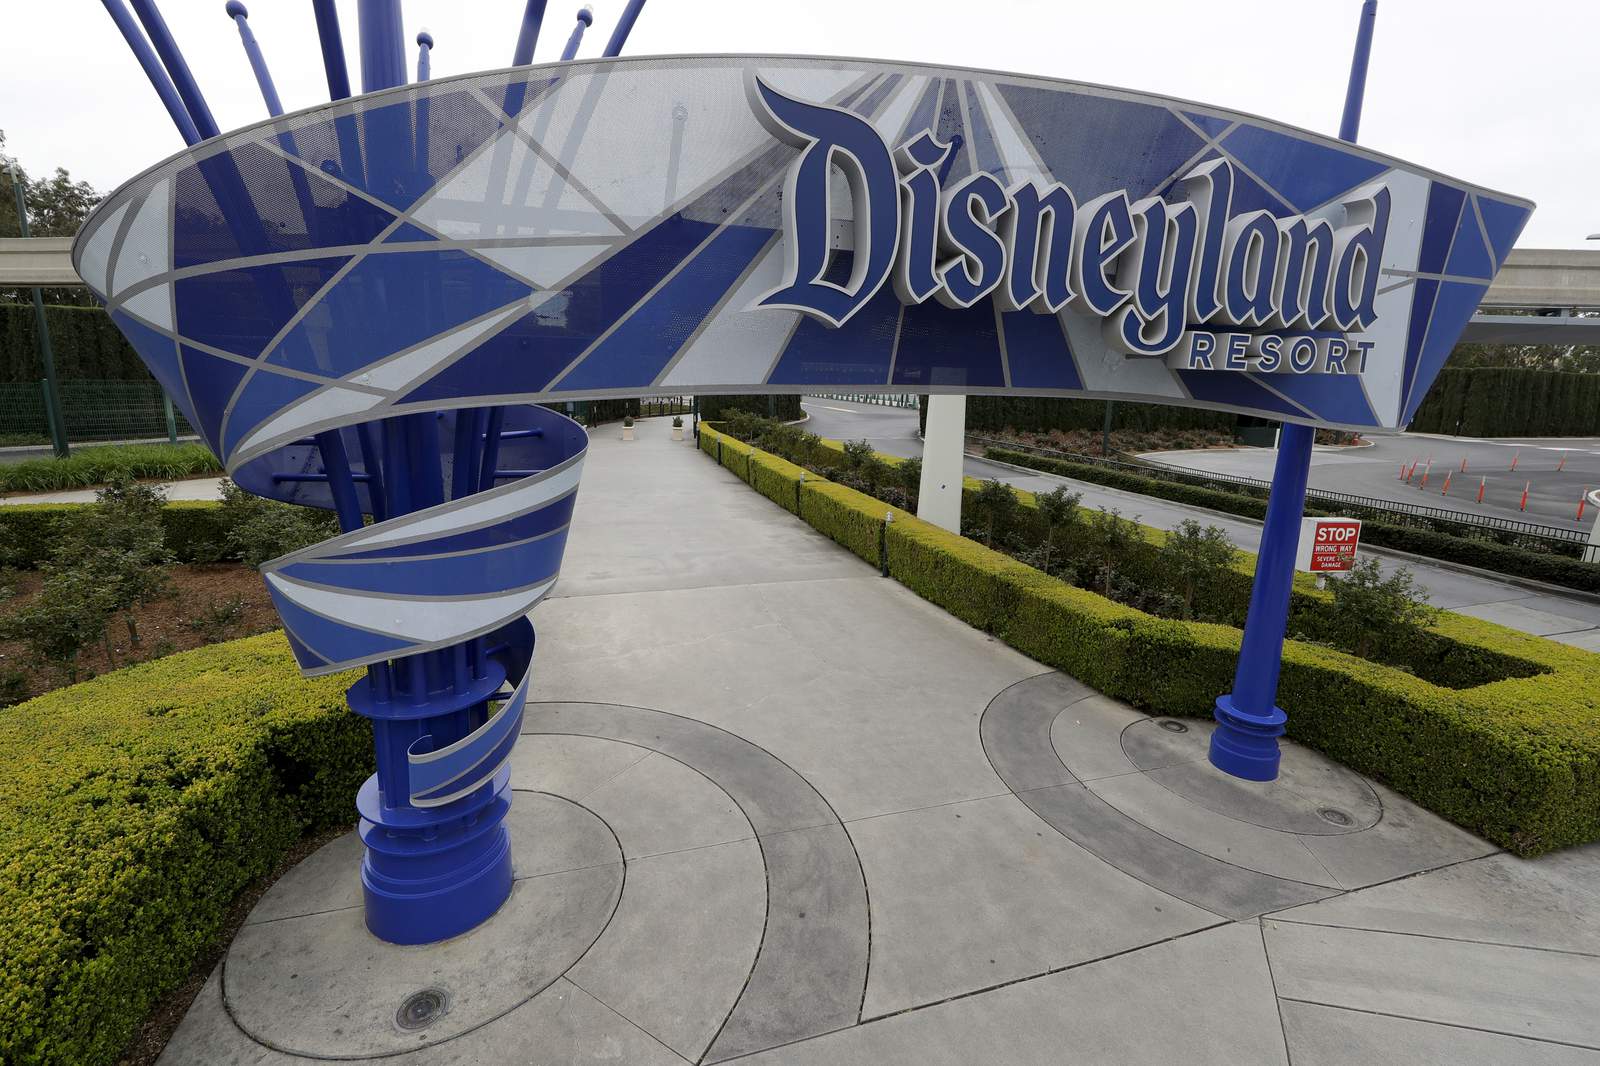 Disneyland ends annual passes 10 months after virus closure